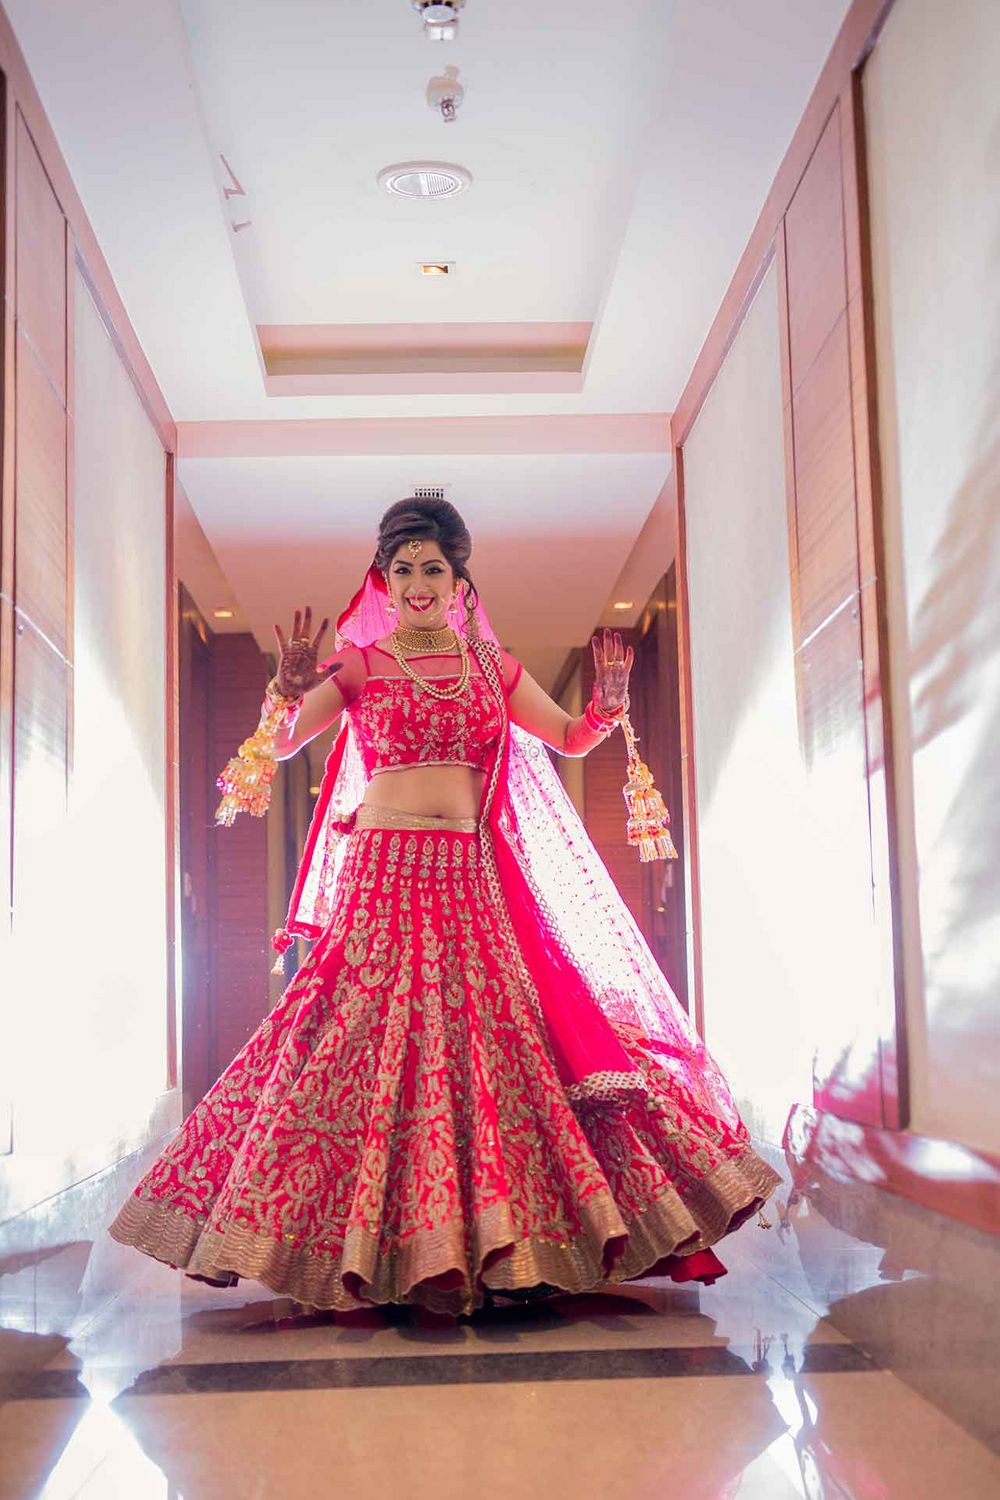 Photo of Bride in Pink and Gold Bridal Lehenga with Kaleere